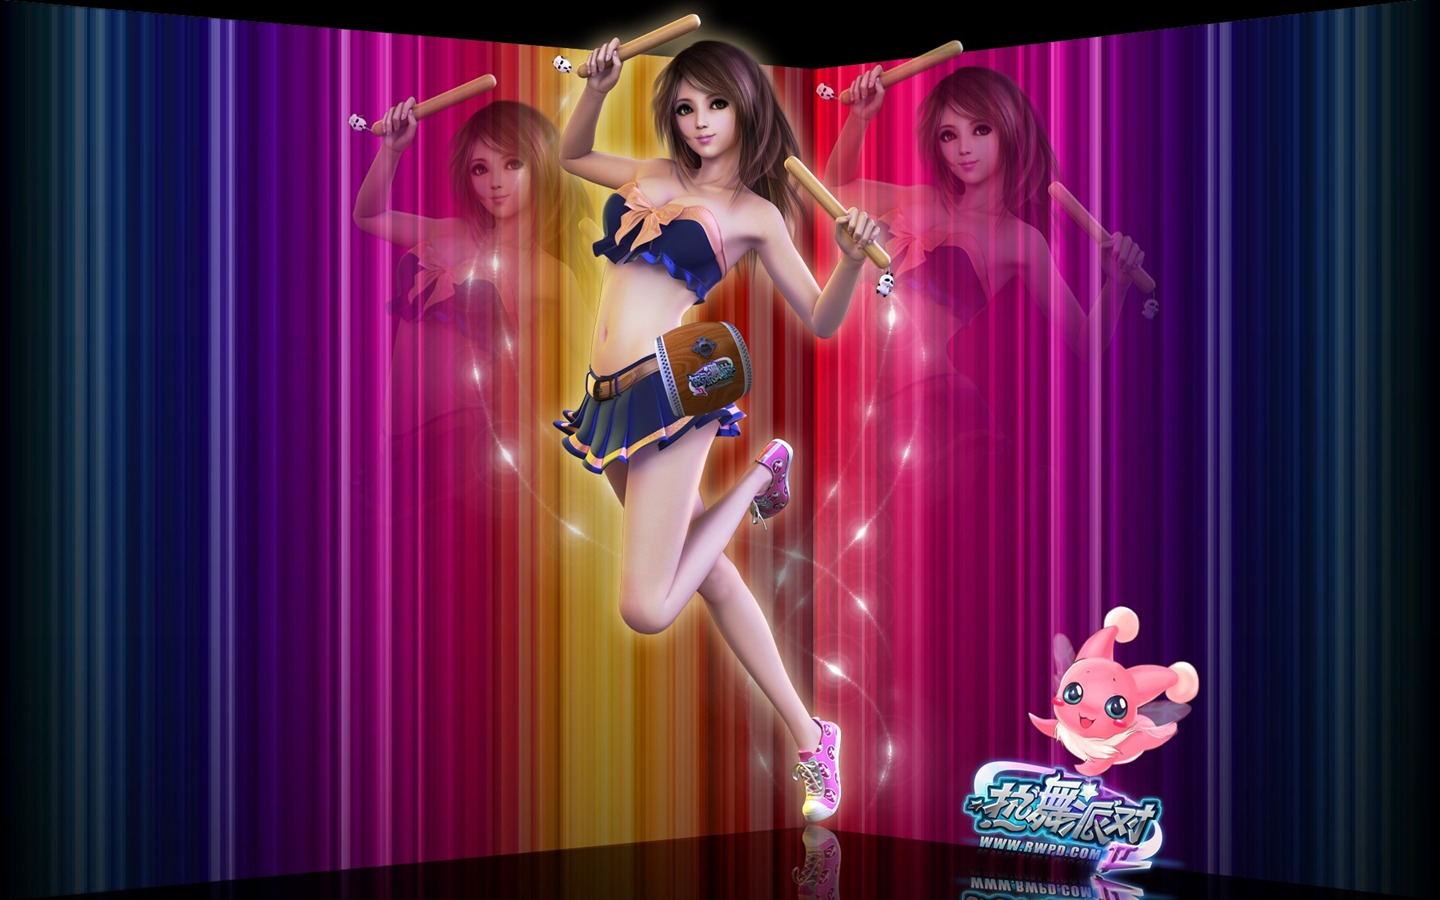 Online game Hot Dance Party II official wallpapers #18 - 1440x900